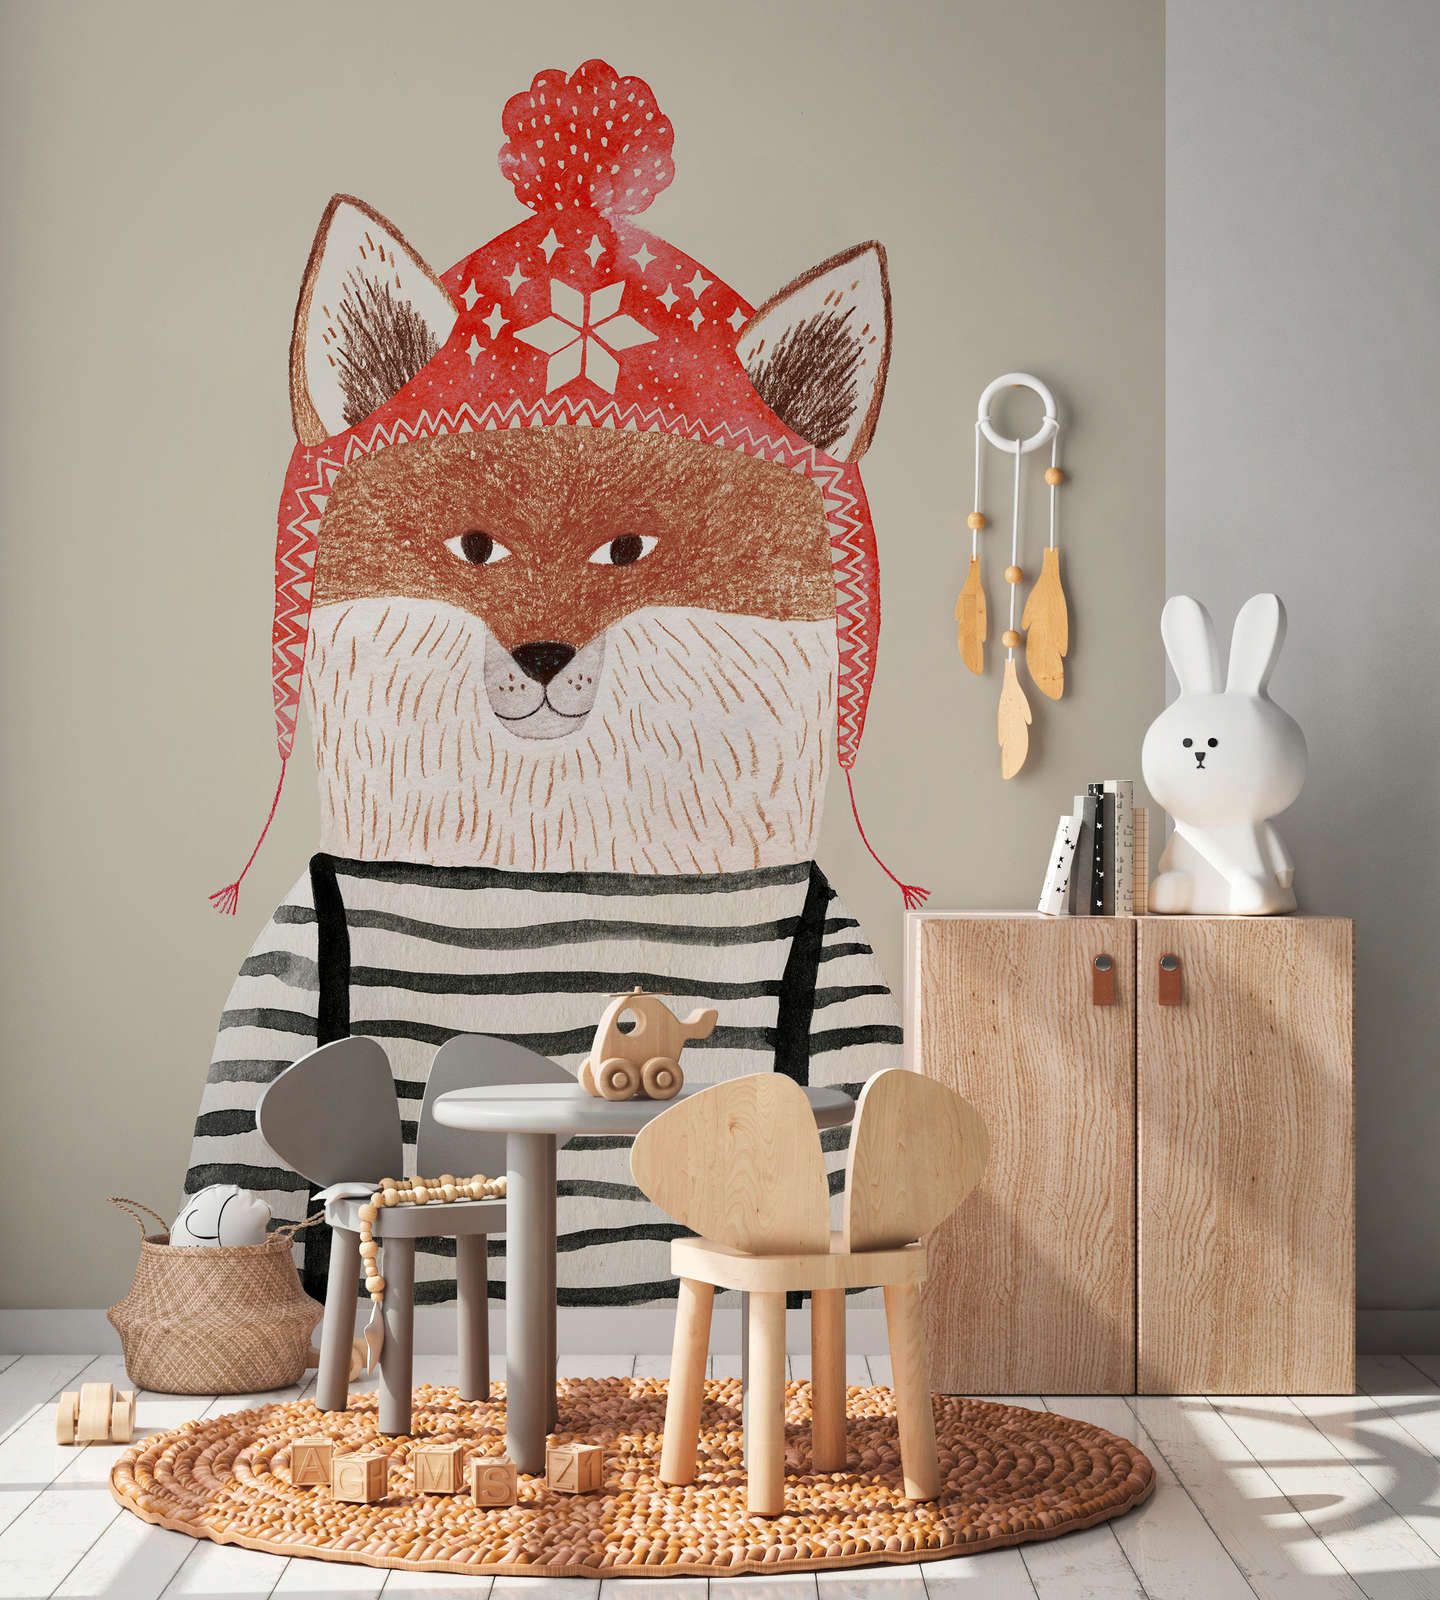             Fox with pom-pom hat mural - textured non-woven
        